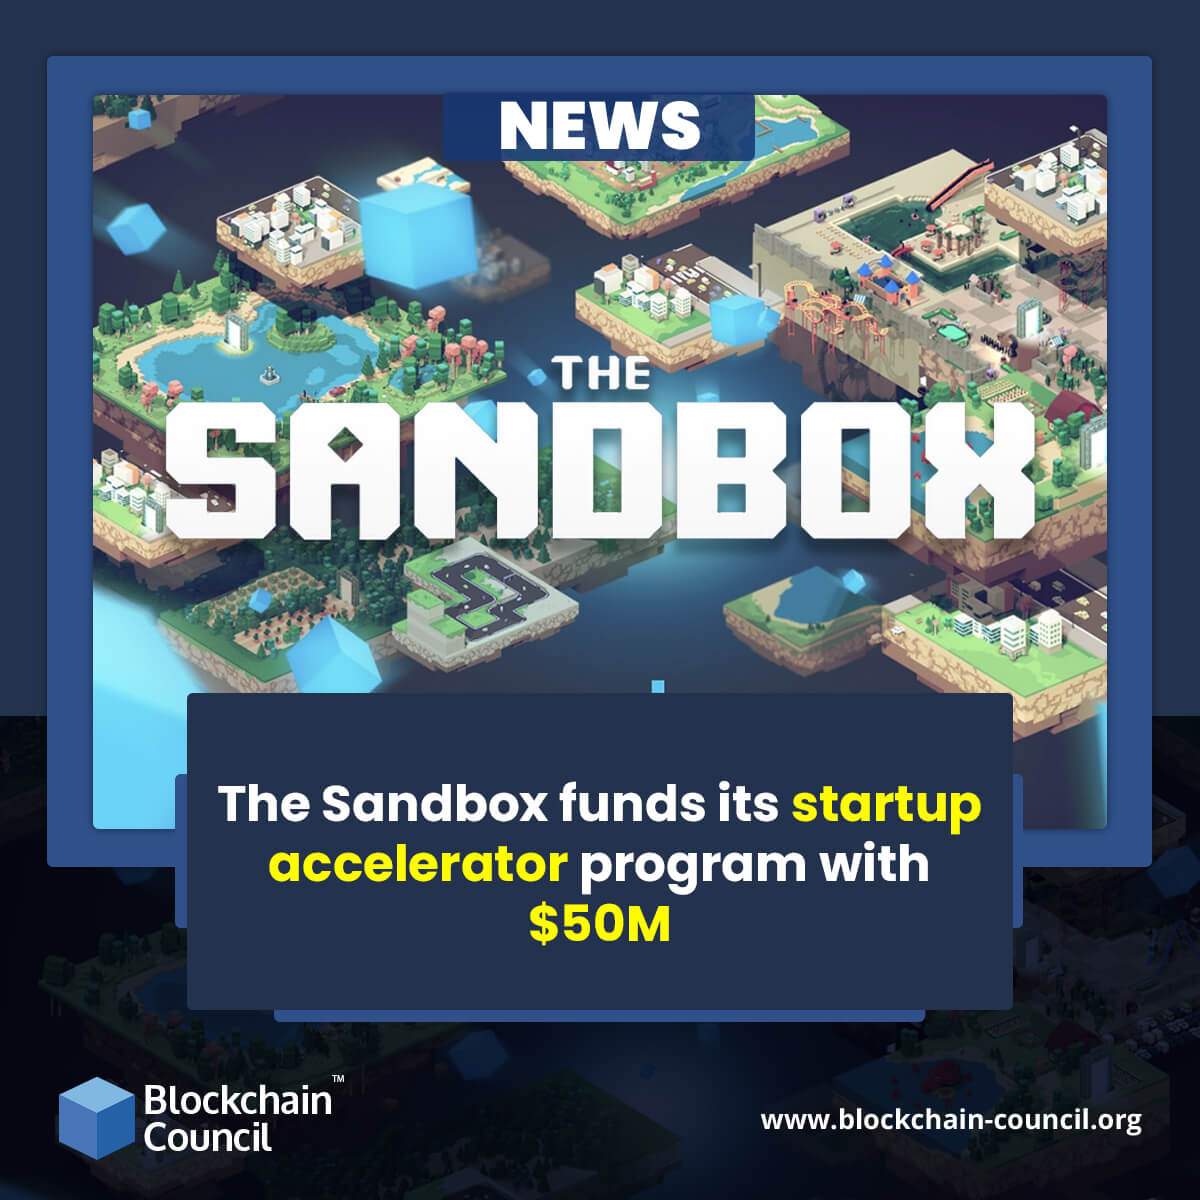 The Sandbox funds its startup accelerator program with $50M